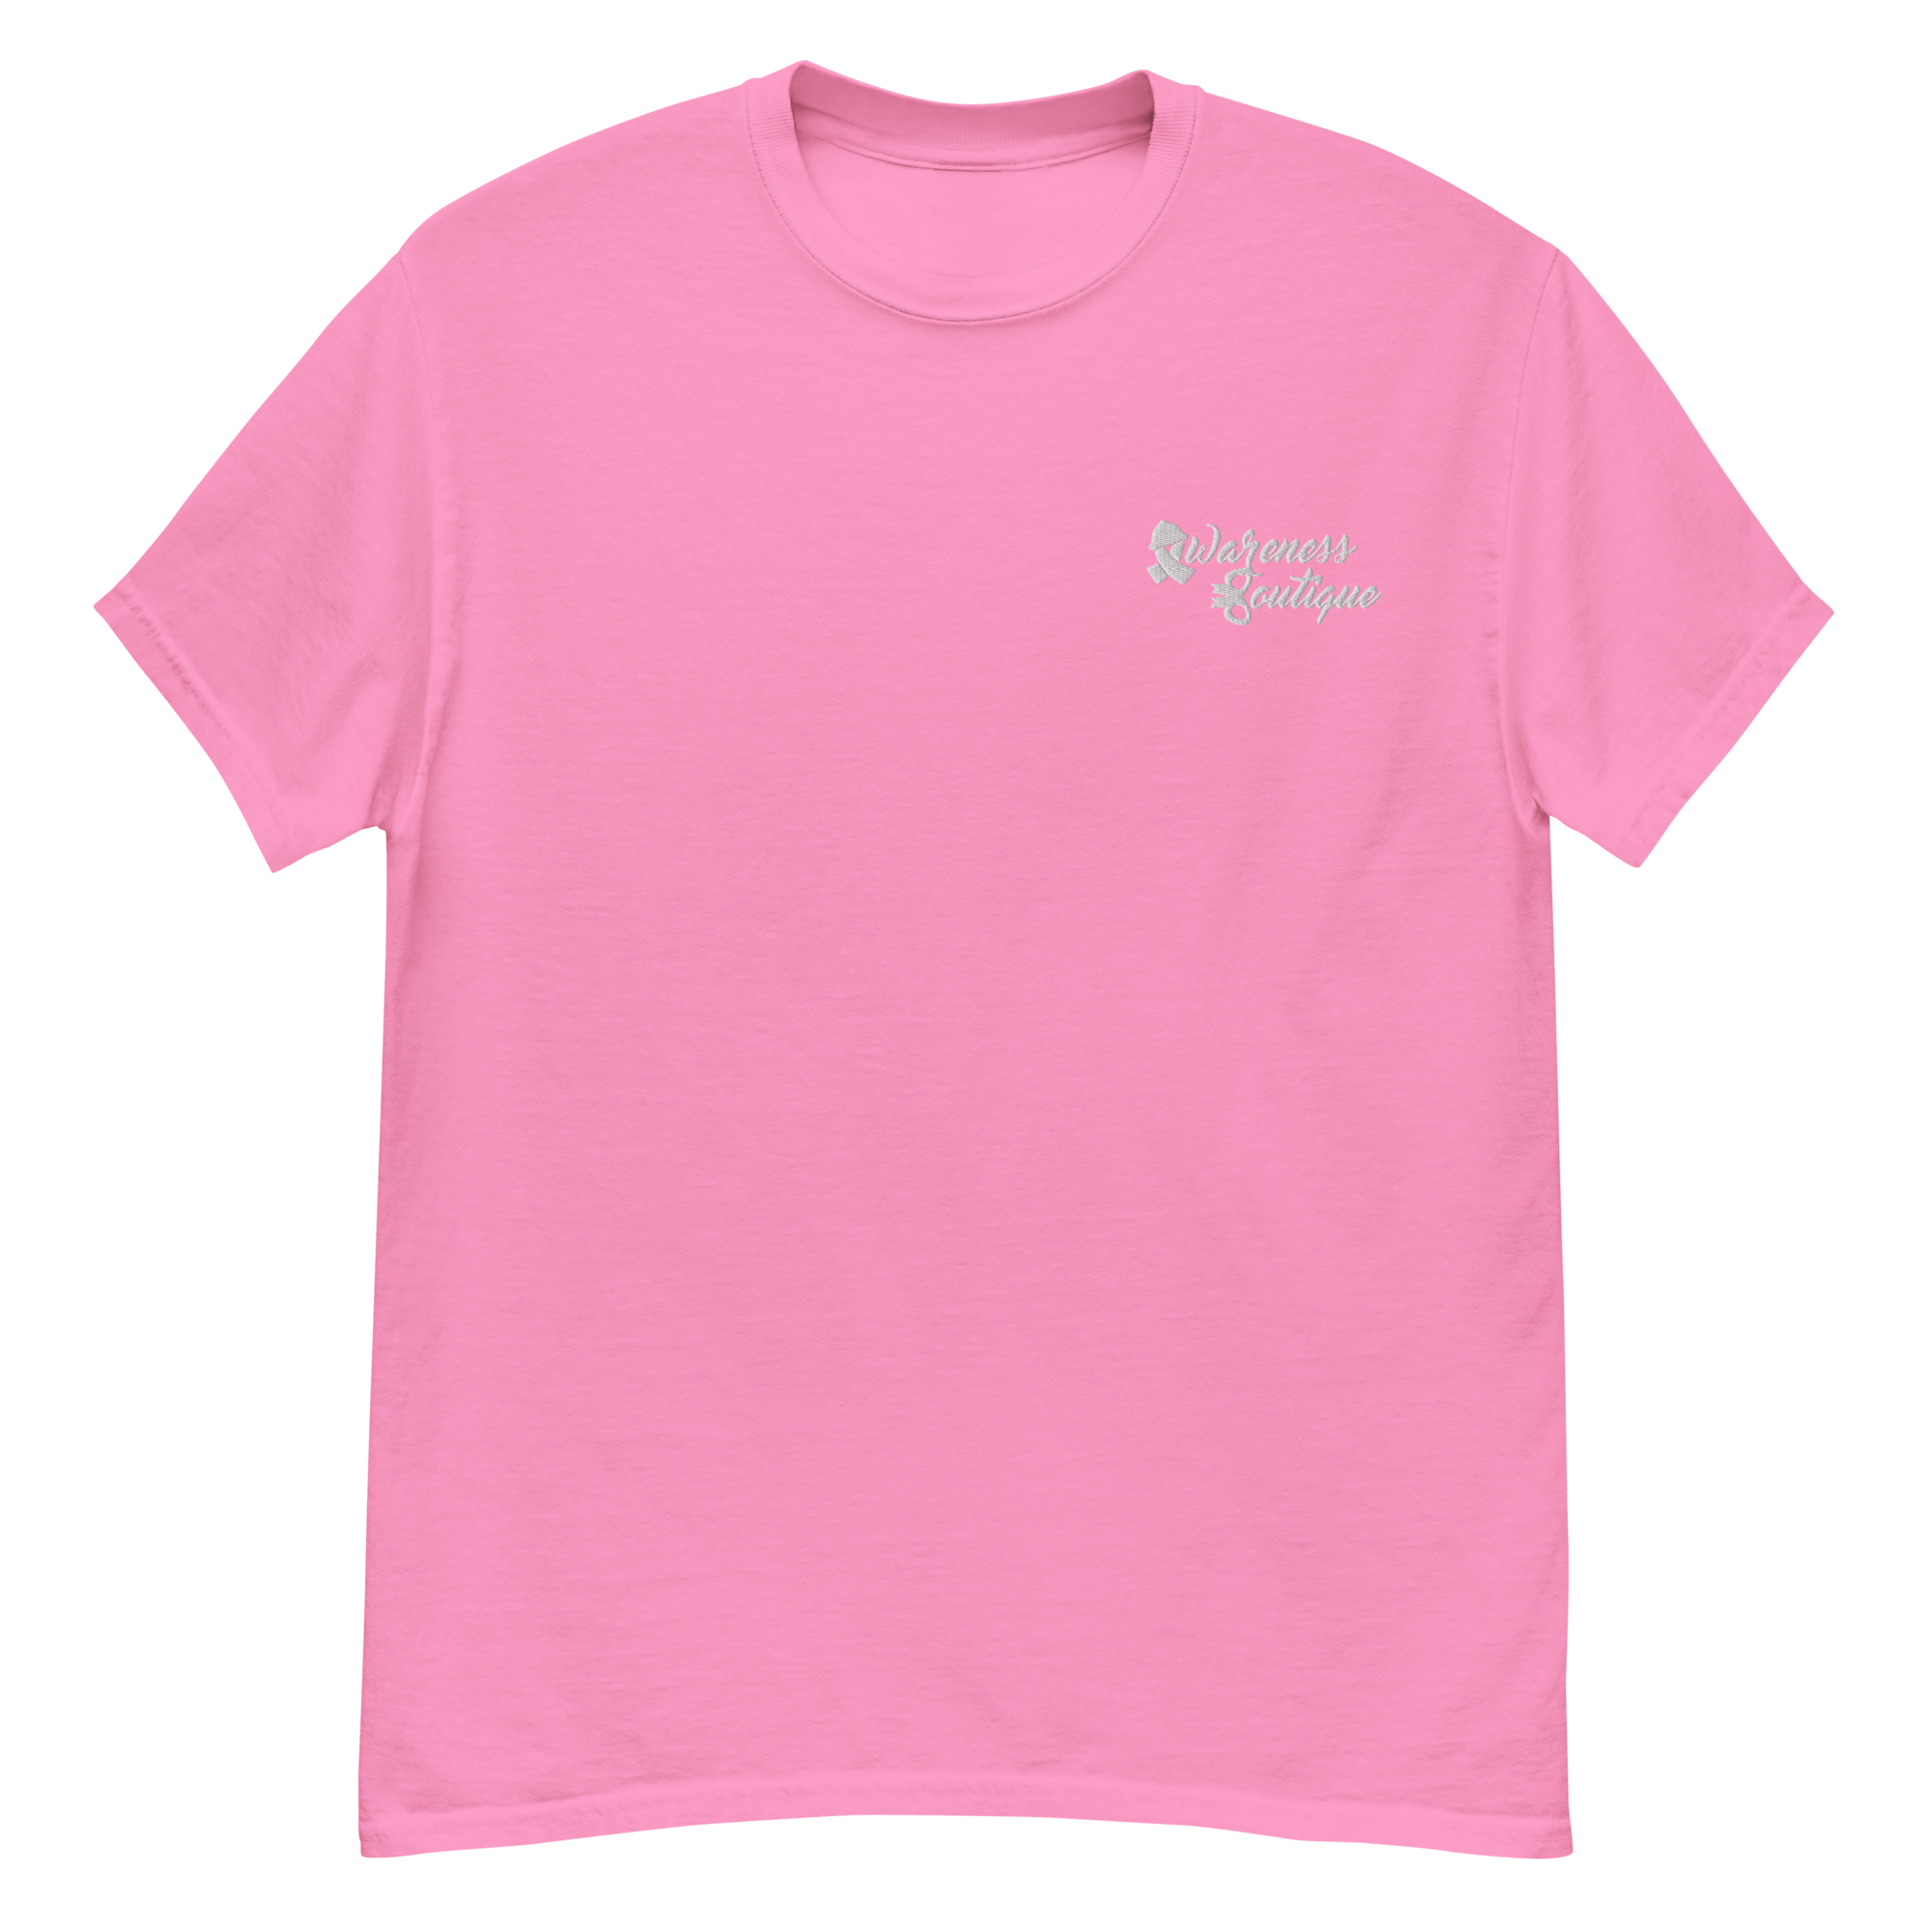 White Ribbon Embroidered Tee - Awareness Boutique